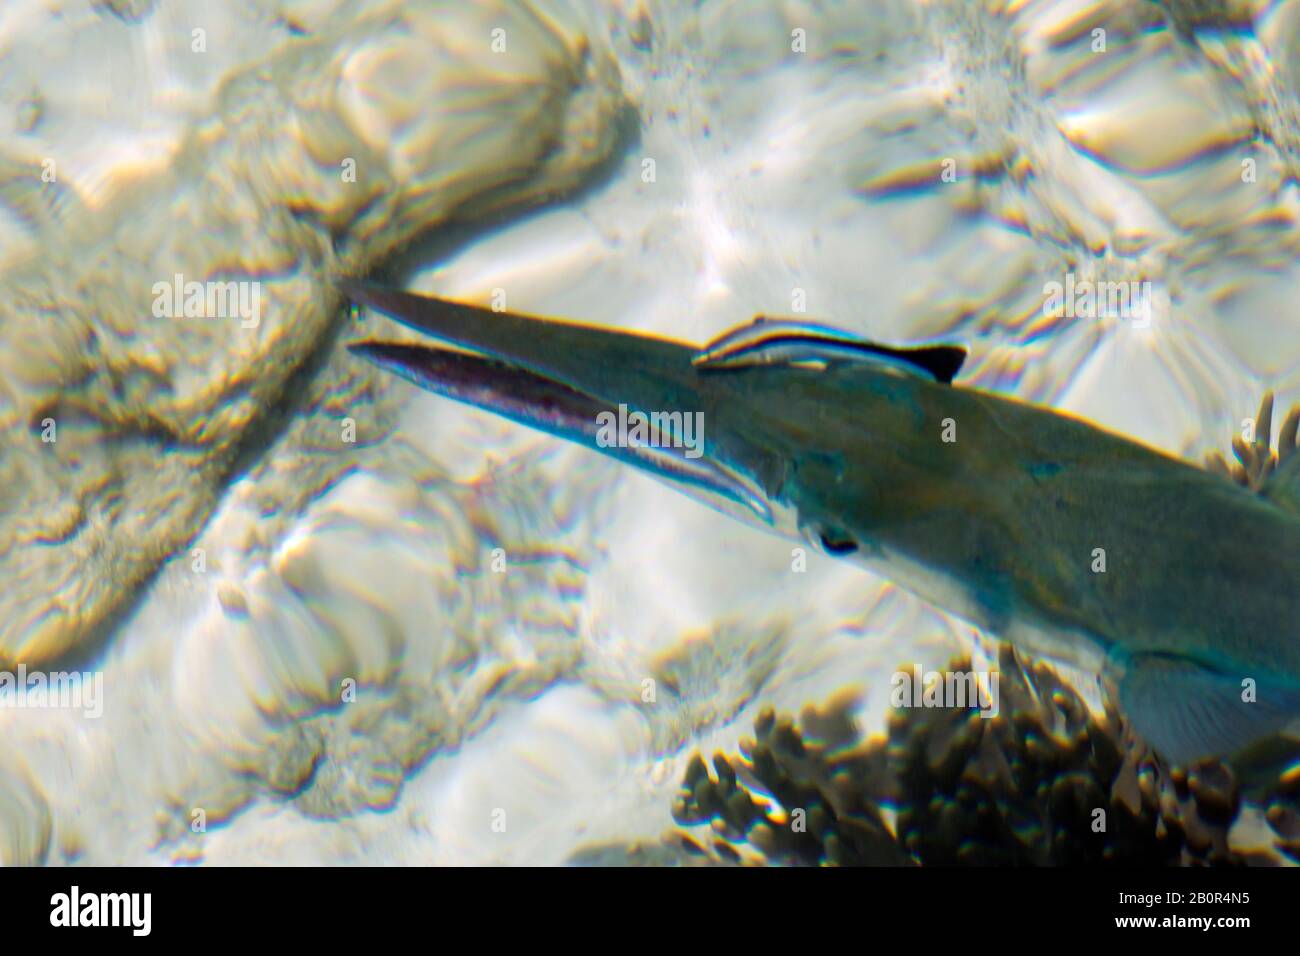 Bluespotted cornetfish, Fistularia commersonii, being cleaned by bluestreak cleaner wrasses, Labroides dimidiatus, Kapalai, Malaysia Stock Photo